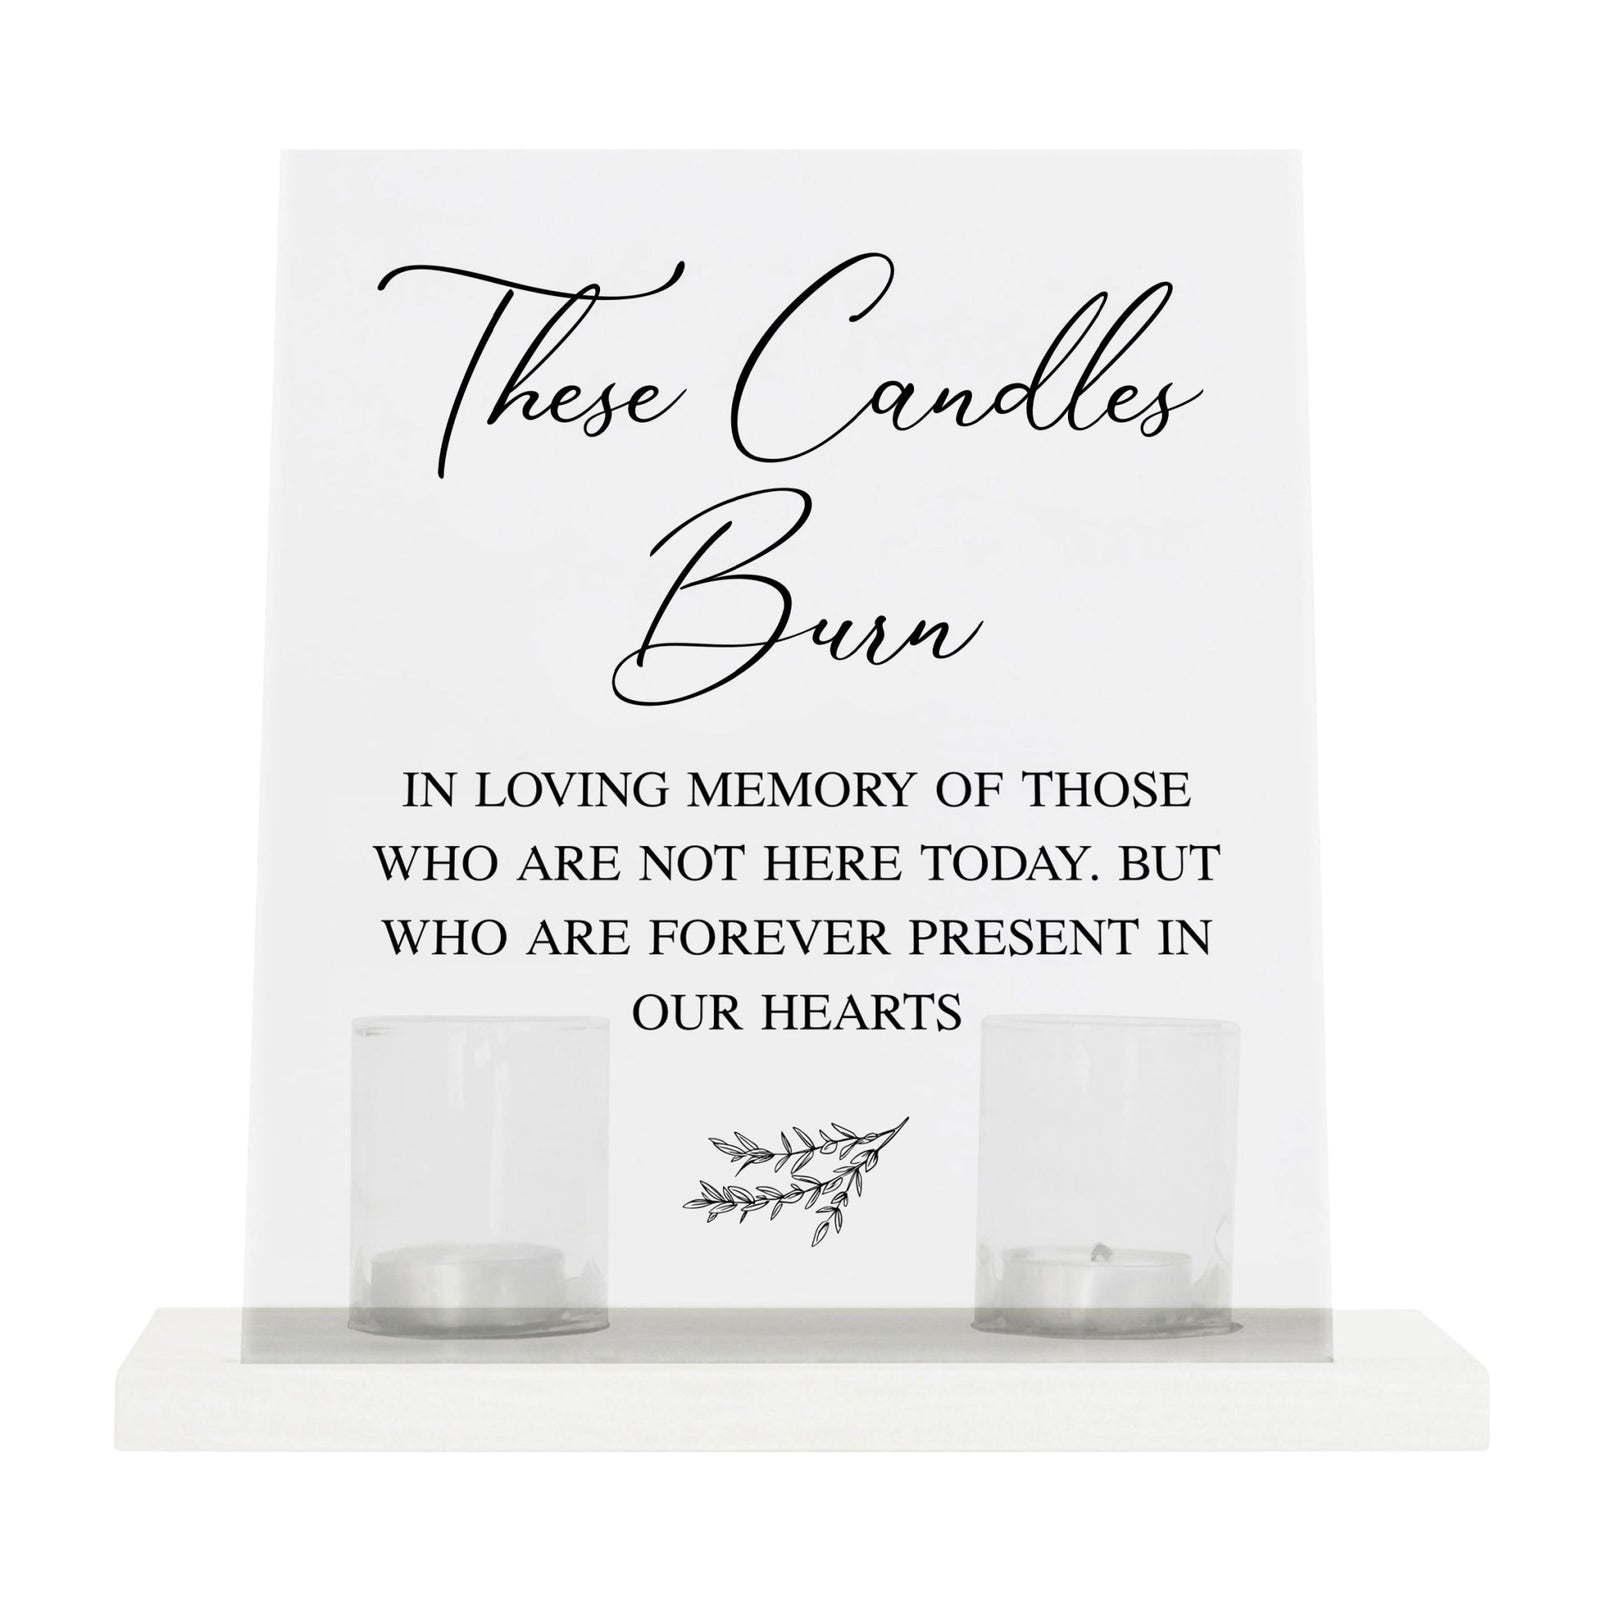 Memorial 8x10 Acrylic Wall Sign with Wooden Base Votive Candle Holder - The Candle Burns - LifeSong Milestones